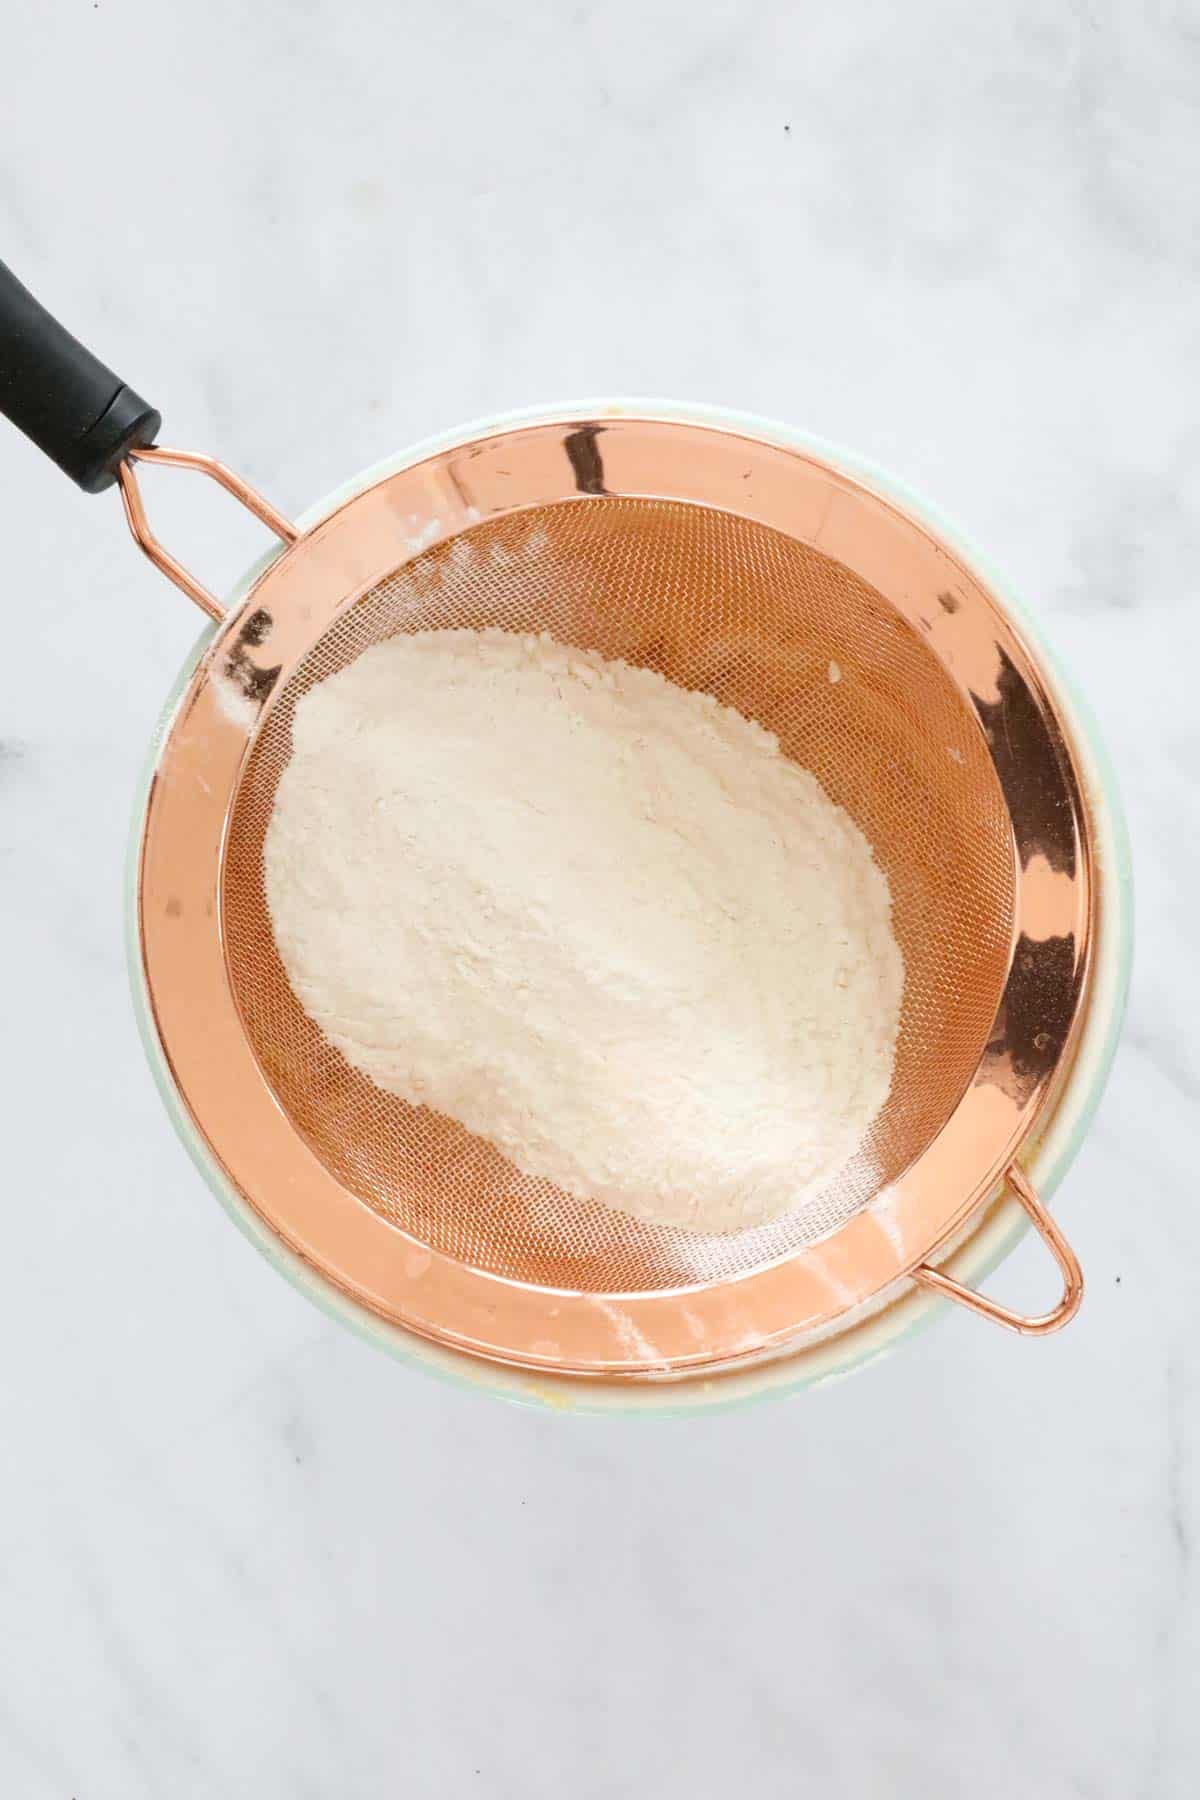 Flour in a copper sieve placed over a bowl.